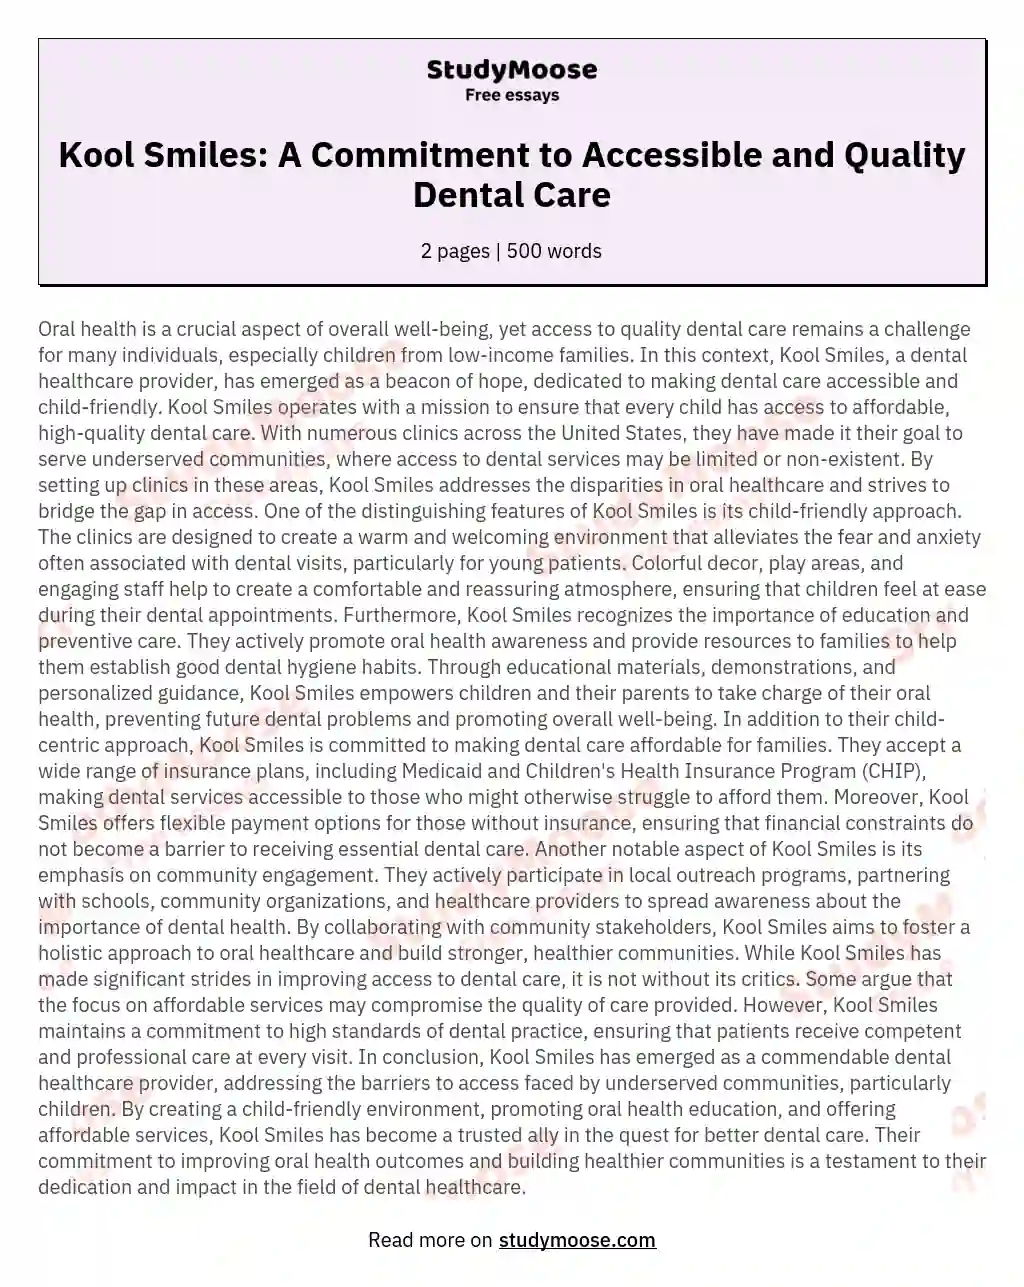 Kool Smiles: A Commitment to Accessible and Quality Dental Care essay